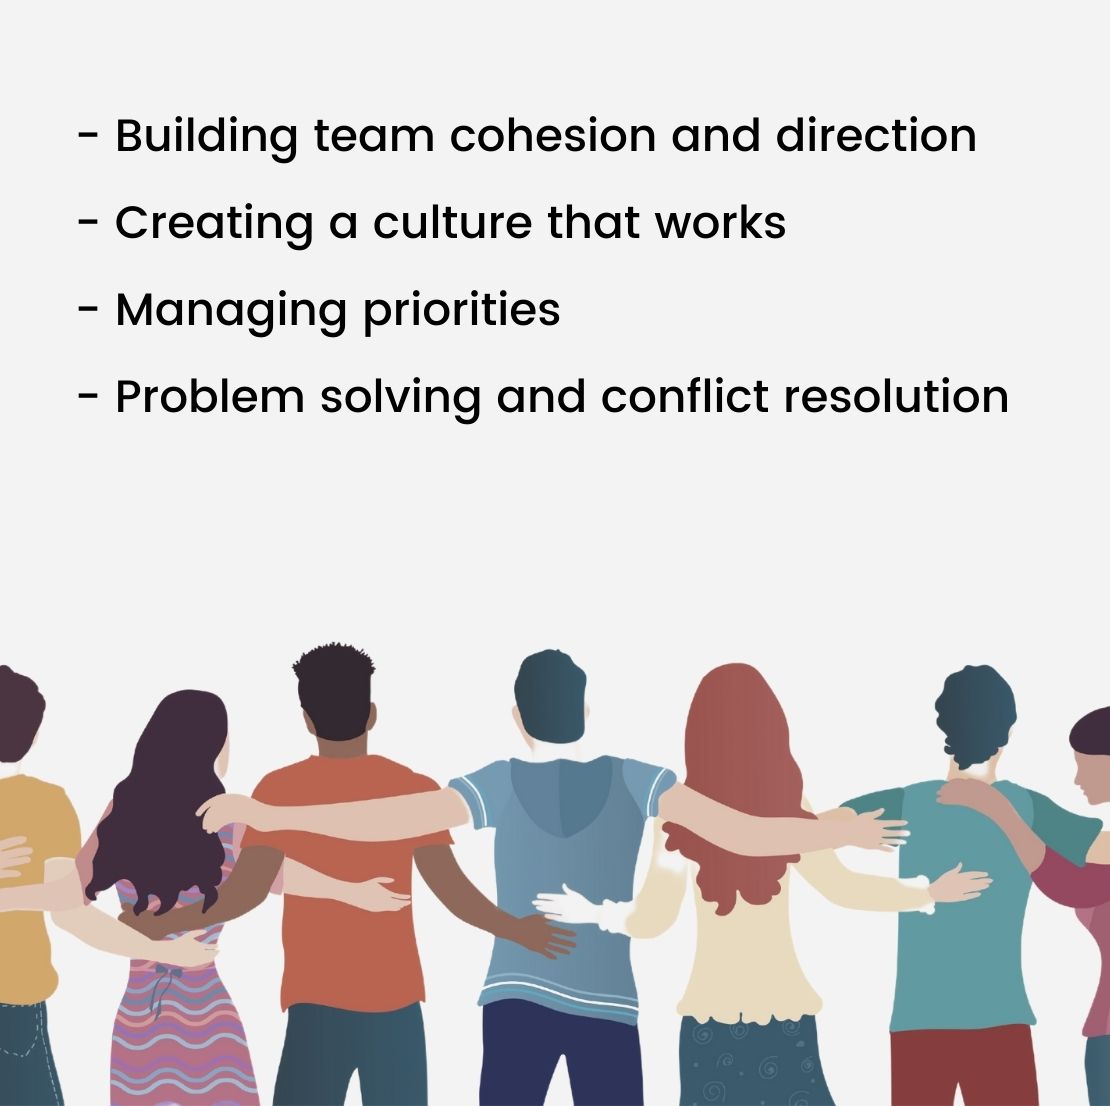  Building team cohesion and direction - Creating a culture that works - Managing priorities - Problem solving and conflict resolution